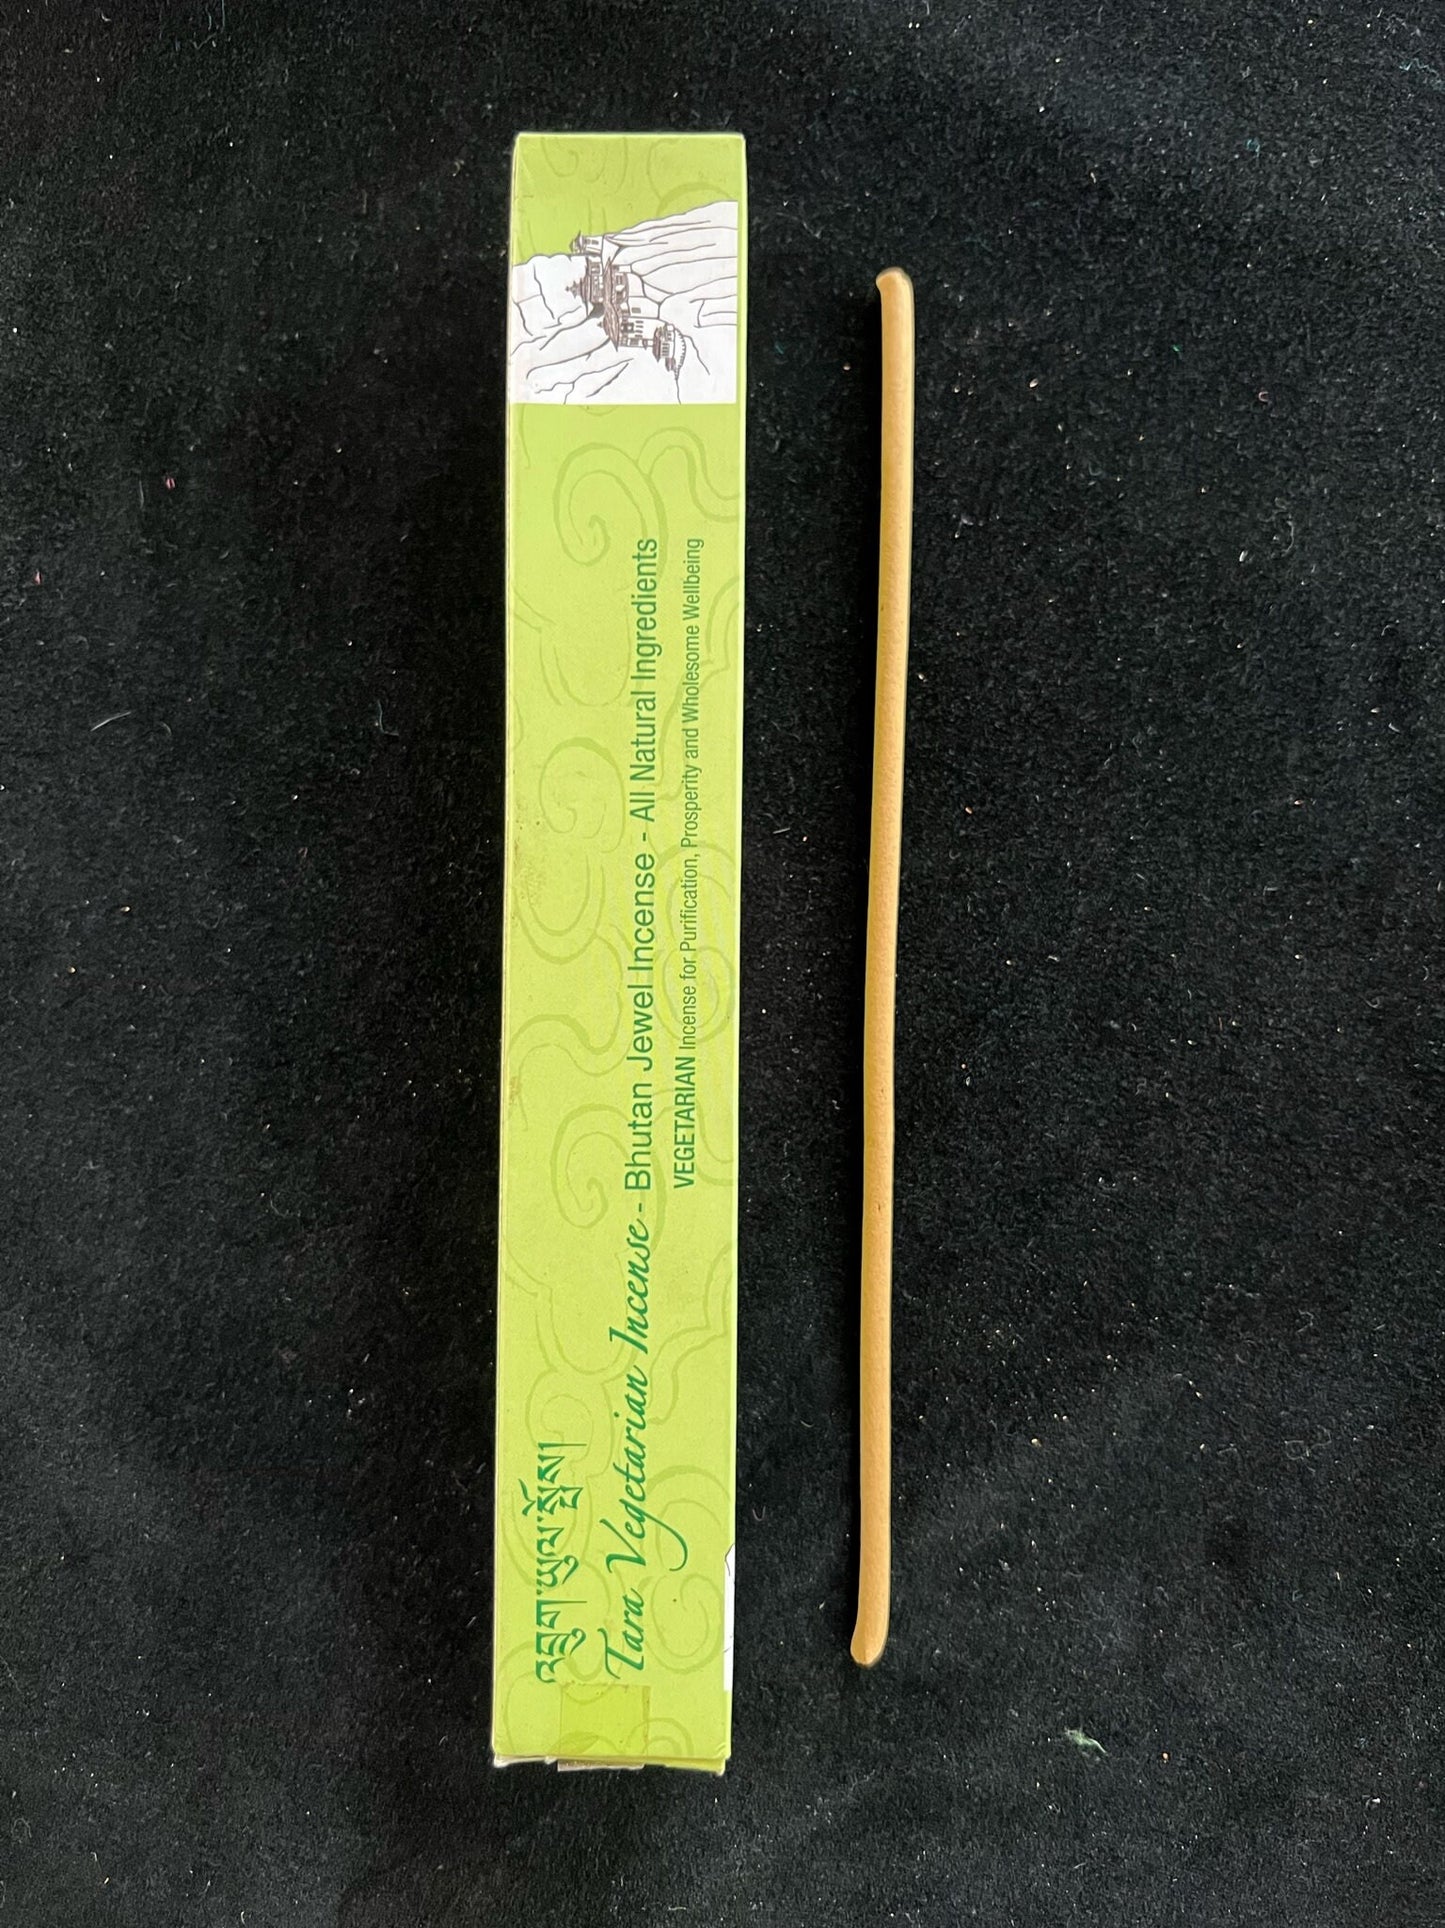 Tara Vegetarian Incense | Bhutanese Incense | Vegetarian Incense for Purification, Prosperity, and Wholesome Wellbeing| 28 sticks